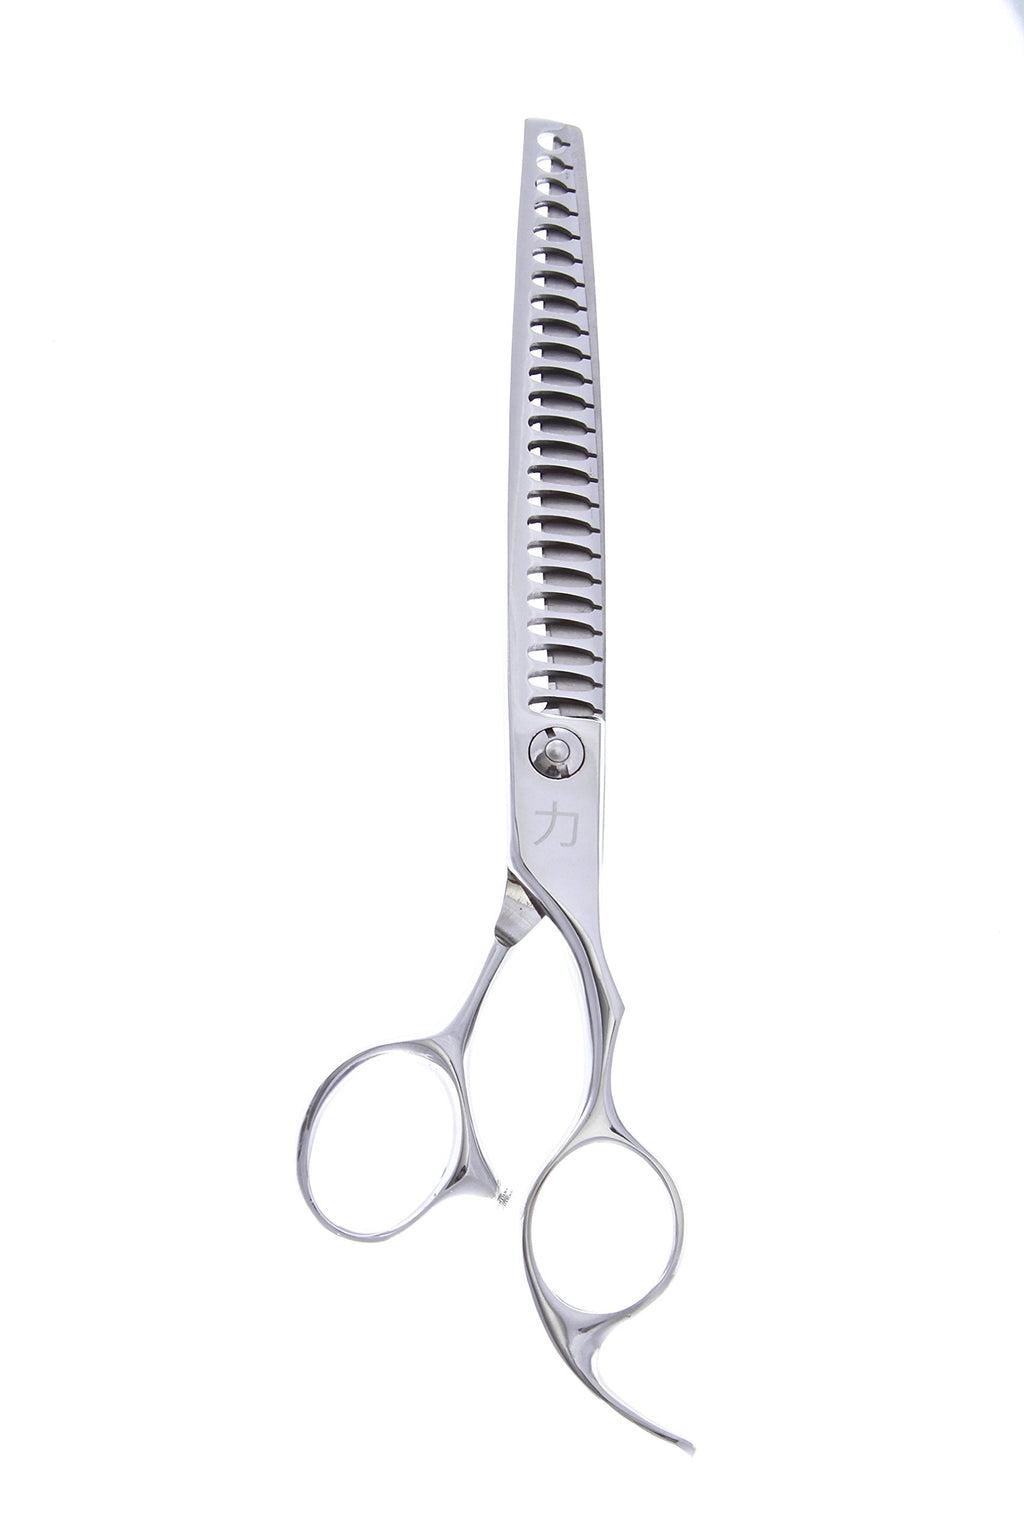 [Australia] - ShearsDirect 24-Tooth Texturizer with Ergonomic Handle and Ball Bearing Tension, 7.5-Inch 